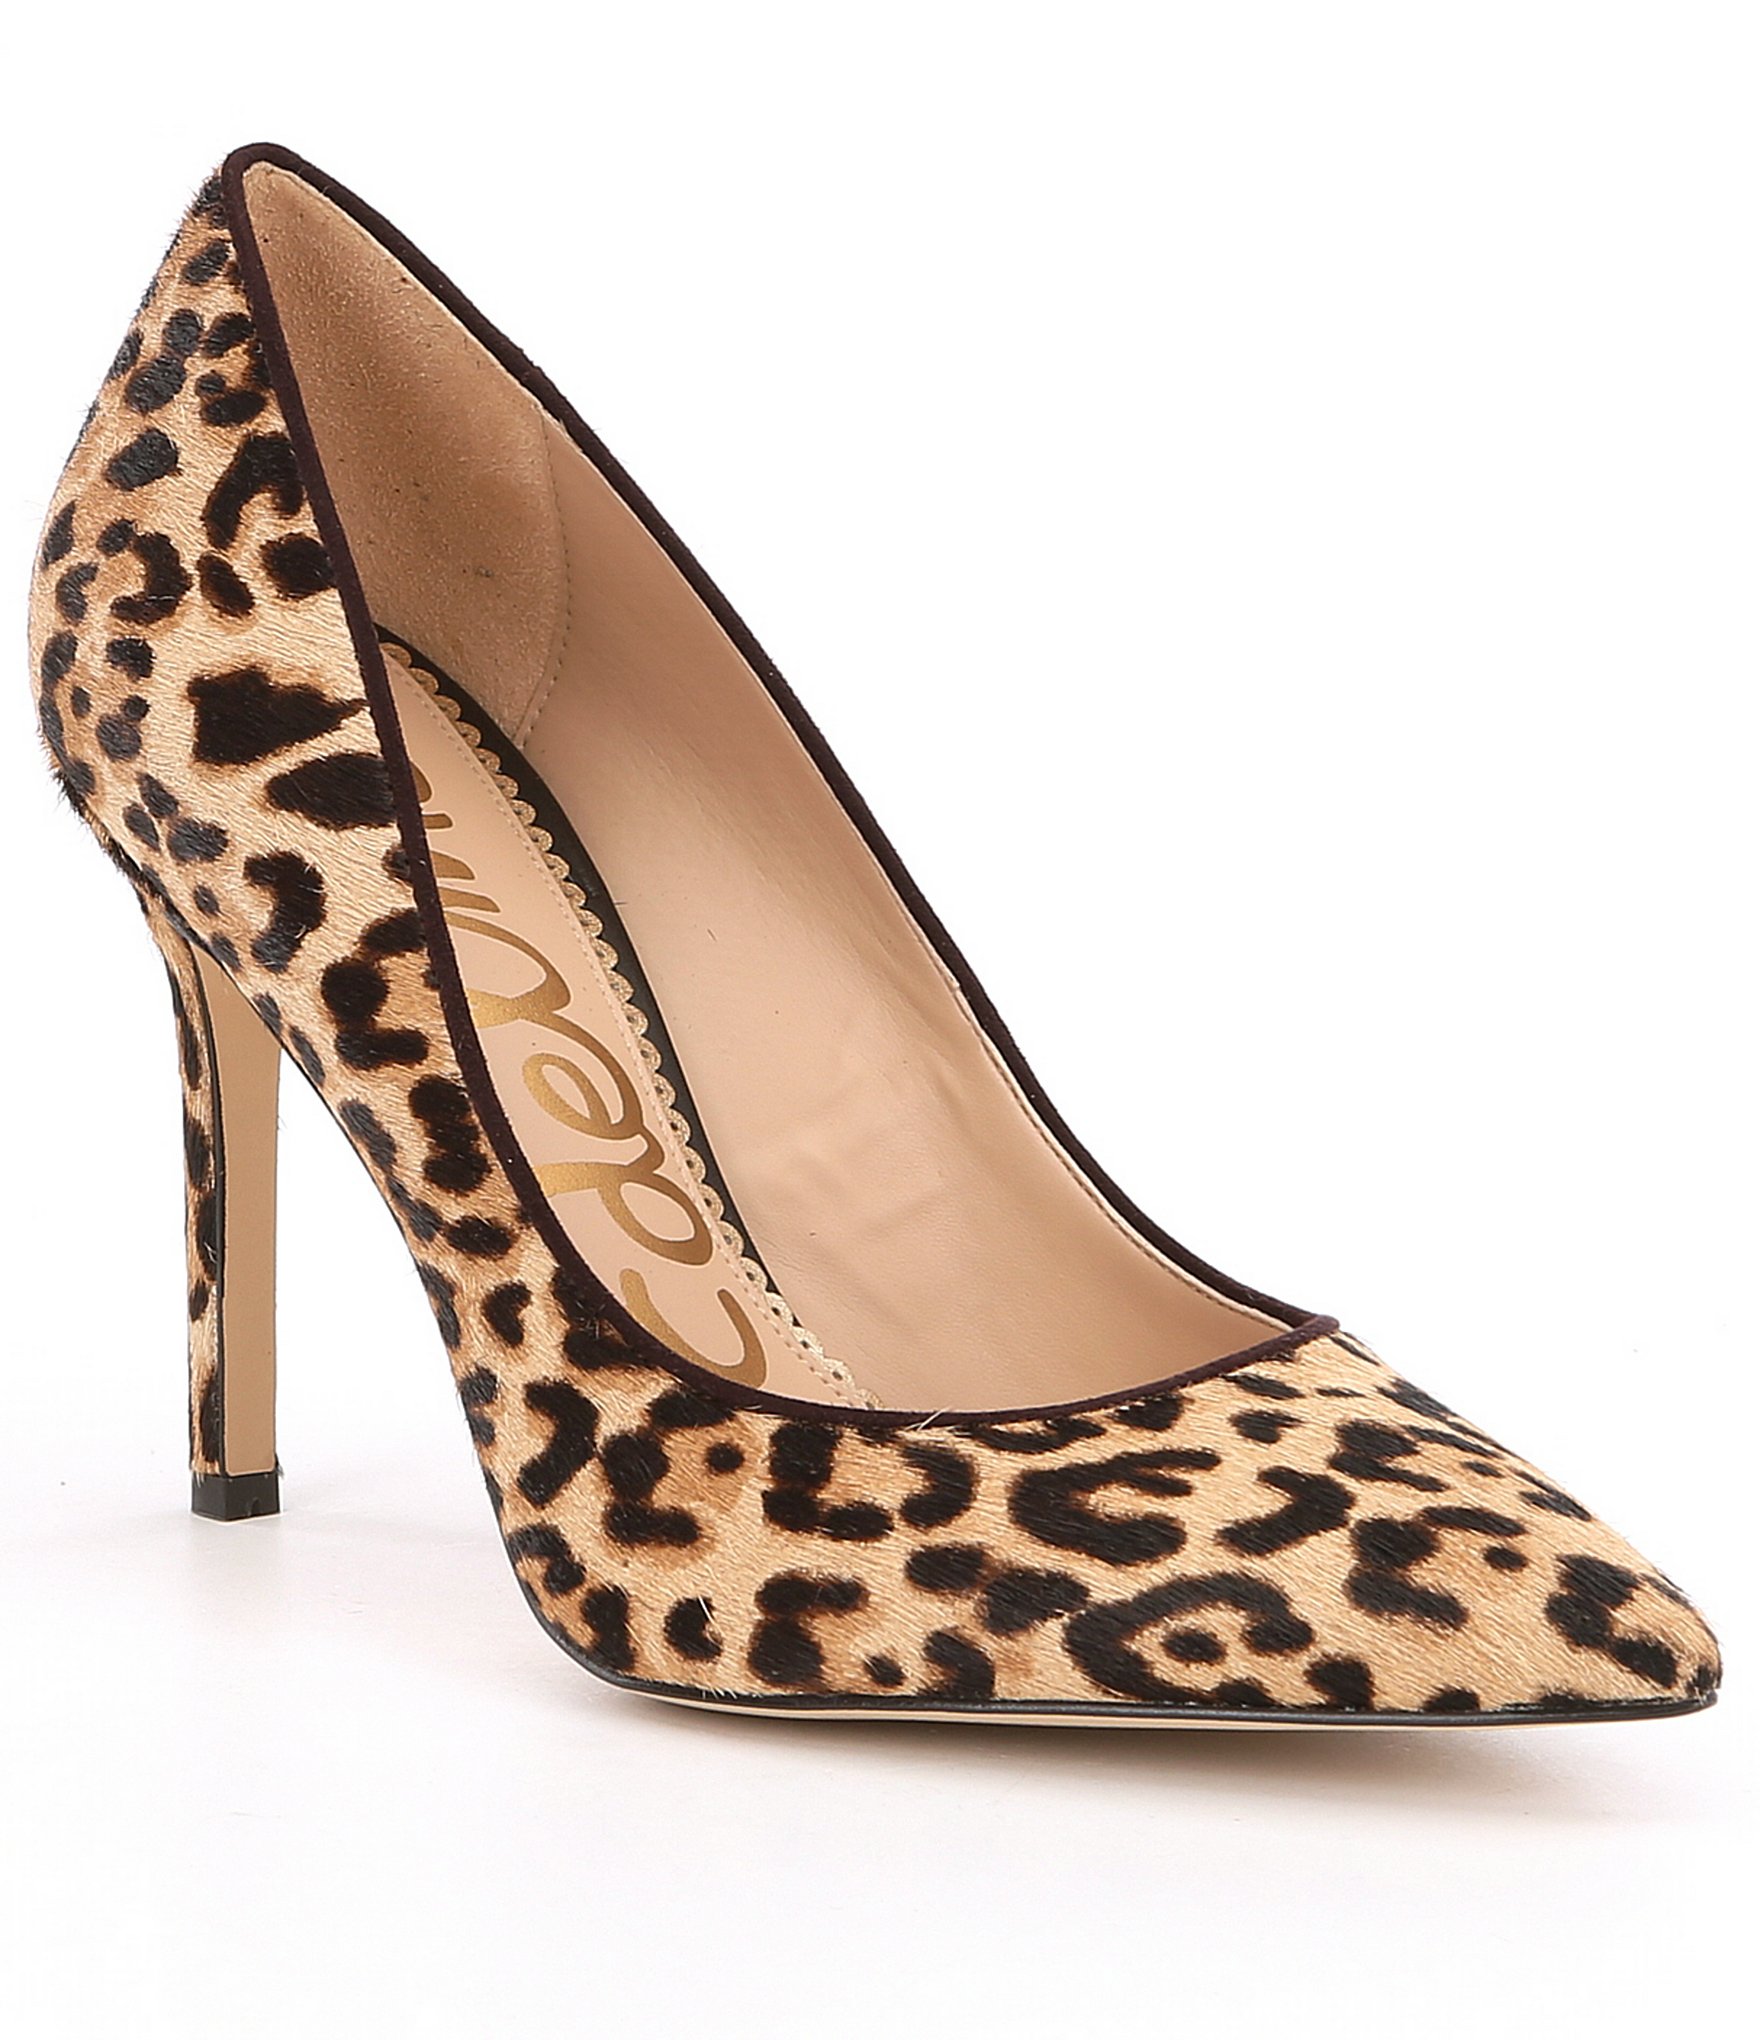 Getting leopard pumps for wearing in all occasions